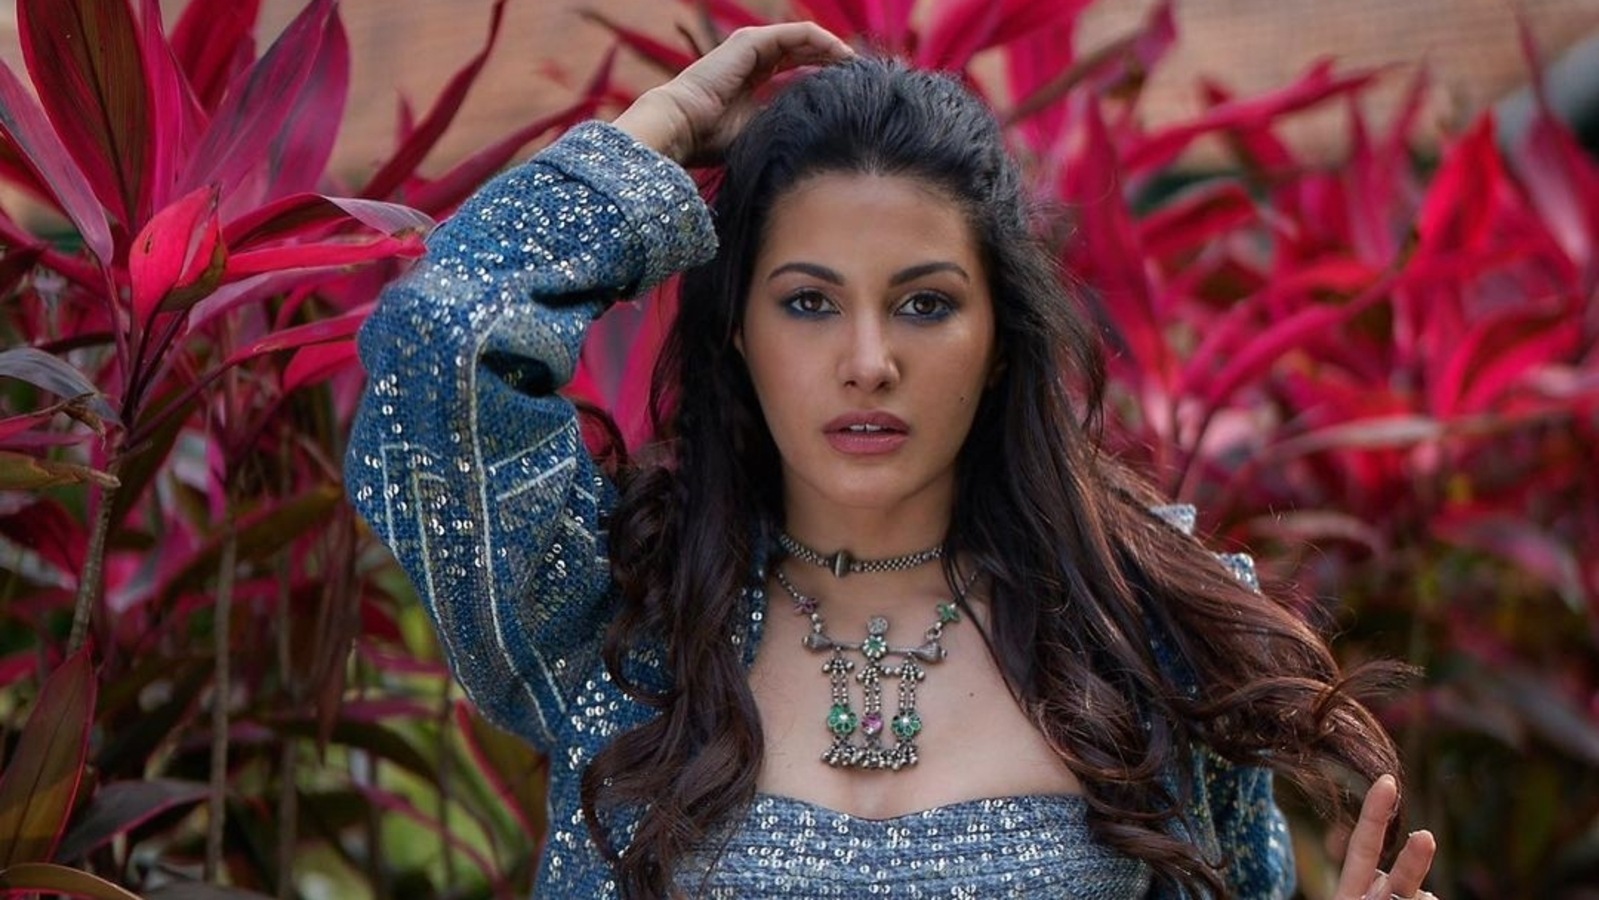 Amyra Dastur gives power dressing a sexy spin in ₹38k bling bralette, pantsuit